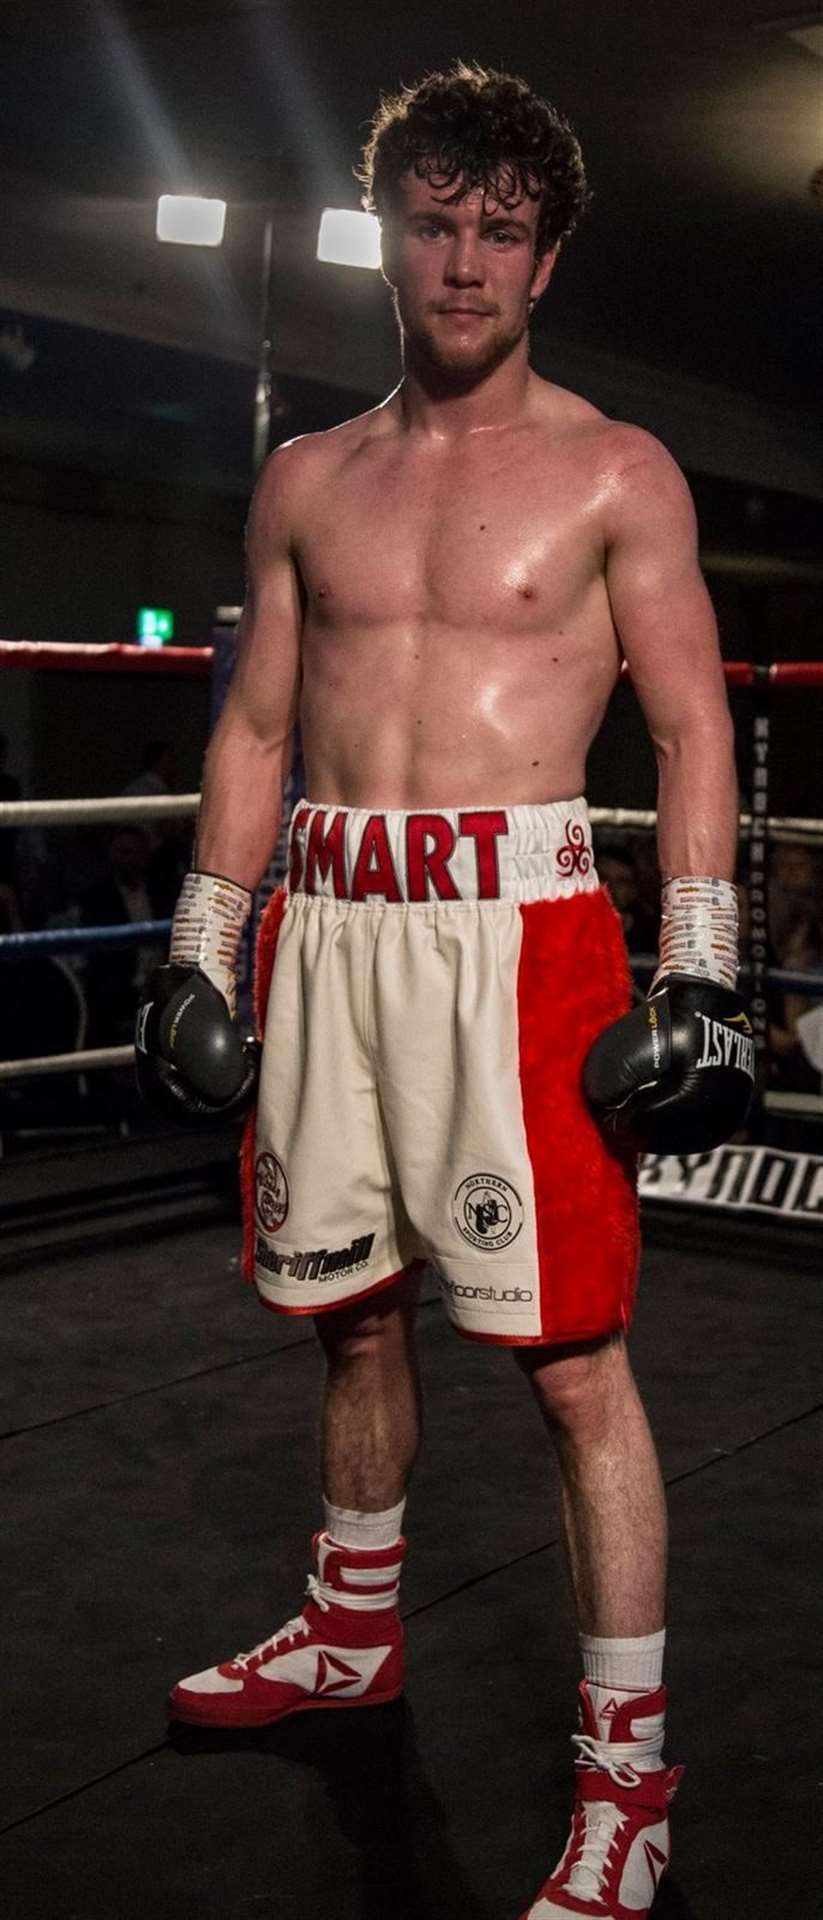 Andrew Smart is relishing his next pro fight in Elgin.